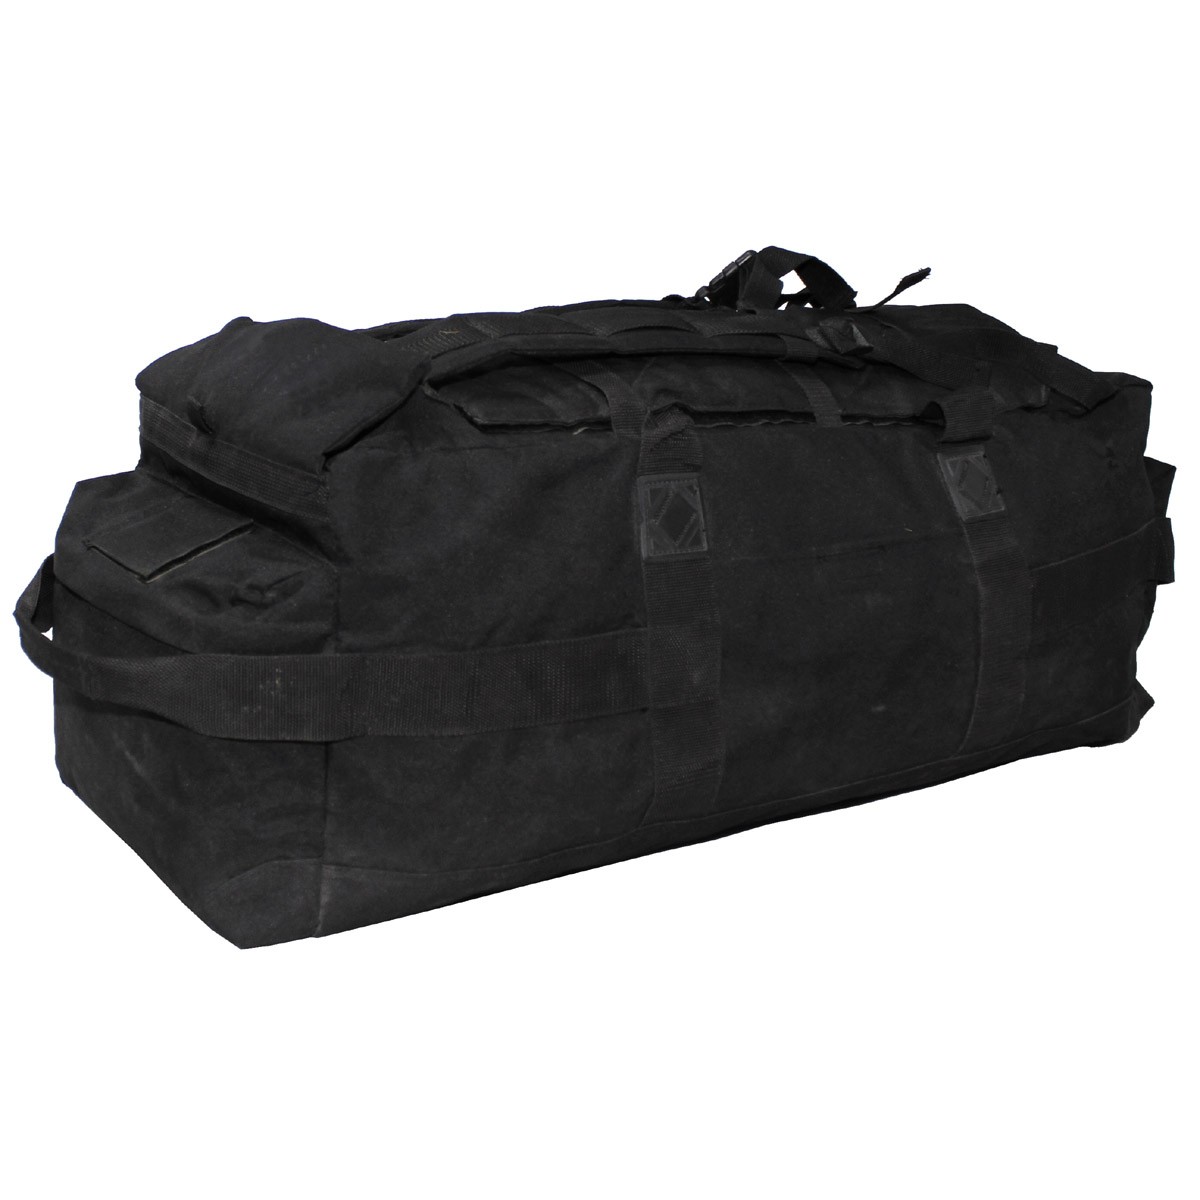 British shipping bag with straps TACTICAL BLACK British Army 91384100 L-11